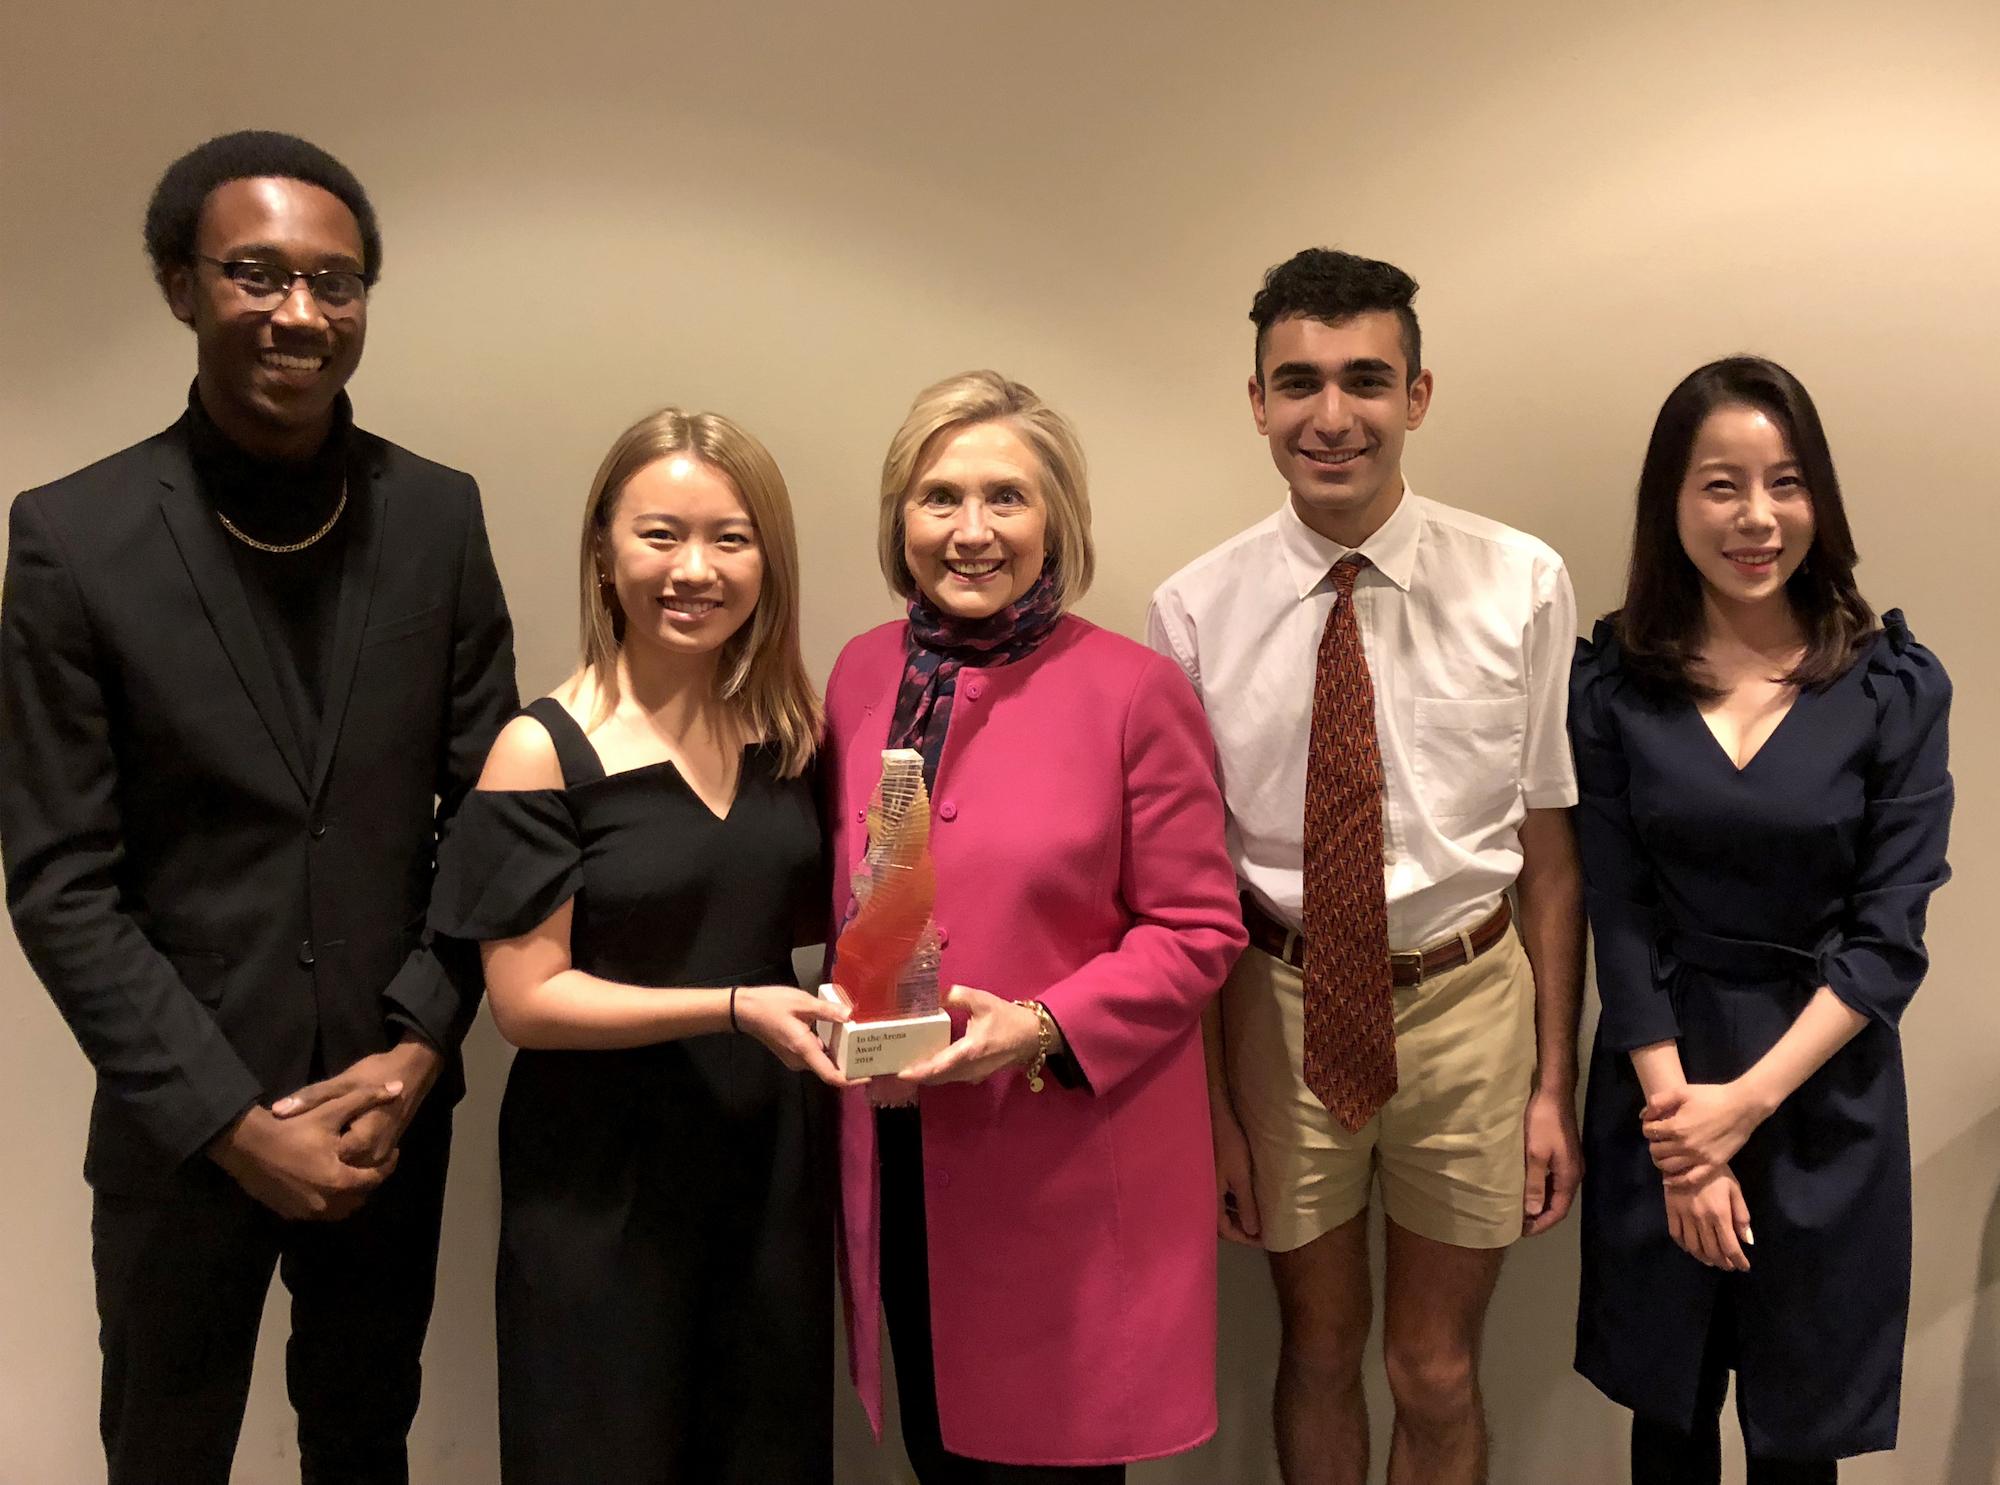 Some of the In The Arena Award design team with recipient Senator Hillary Clinton